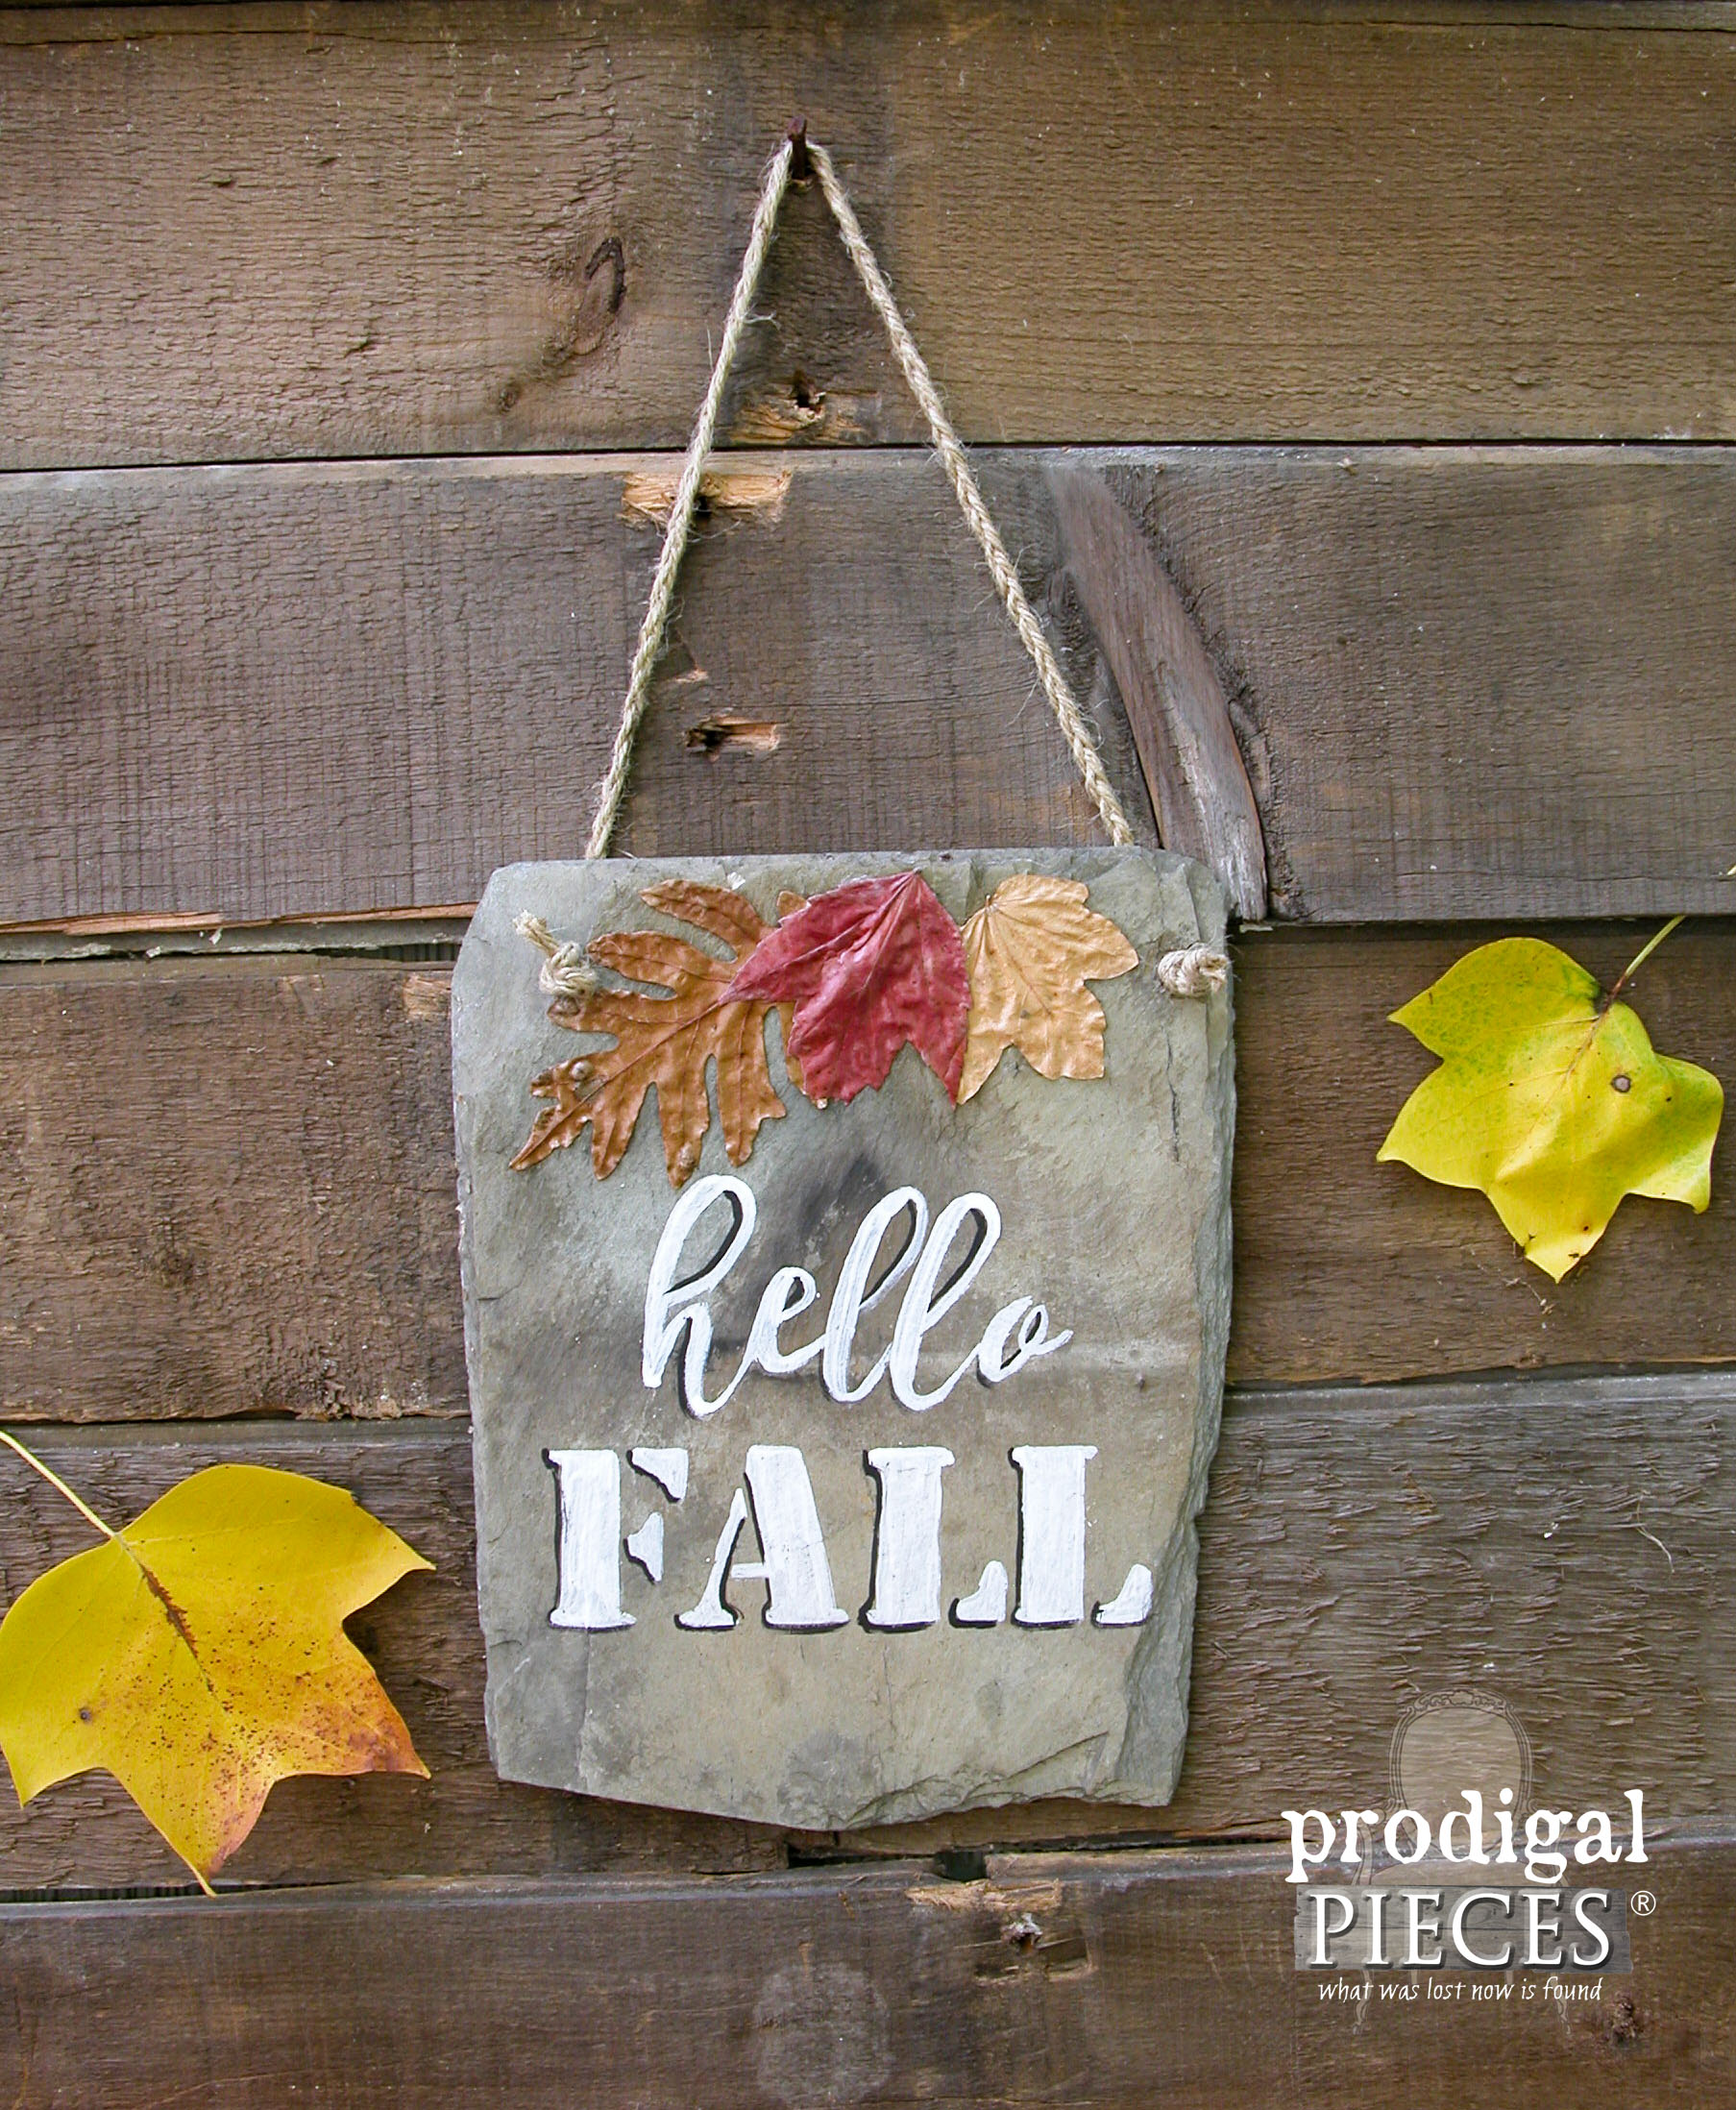 Hello Fall Sign Painted on Reclaimed Barn Roof Slate Shingel by Prodigal Pieces | www.prodigalpieces.com